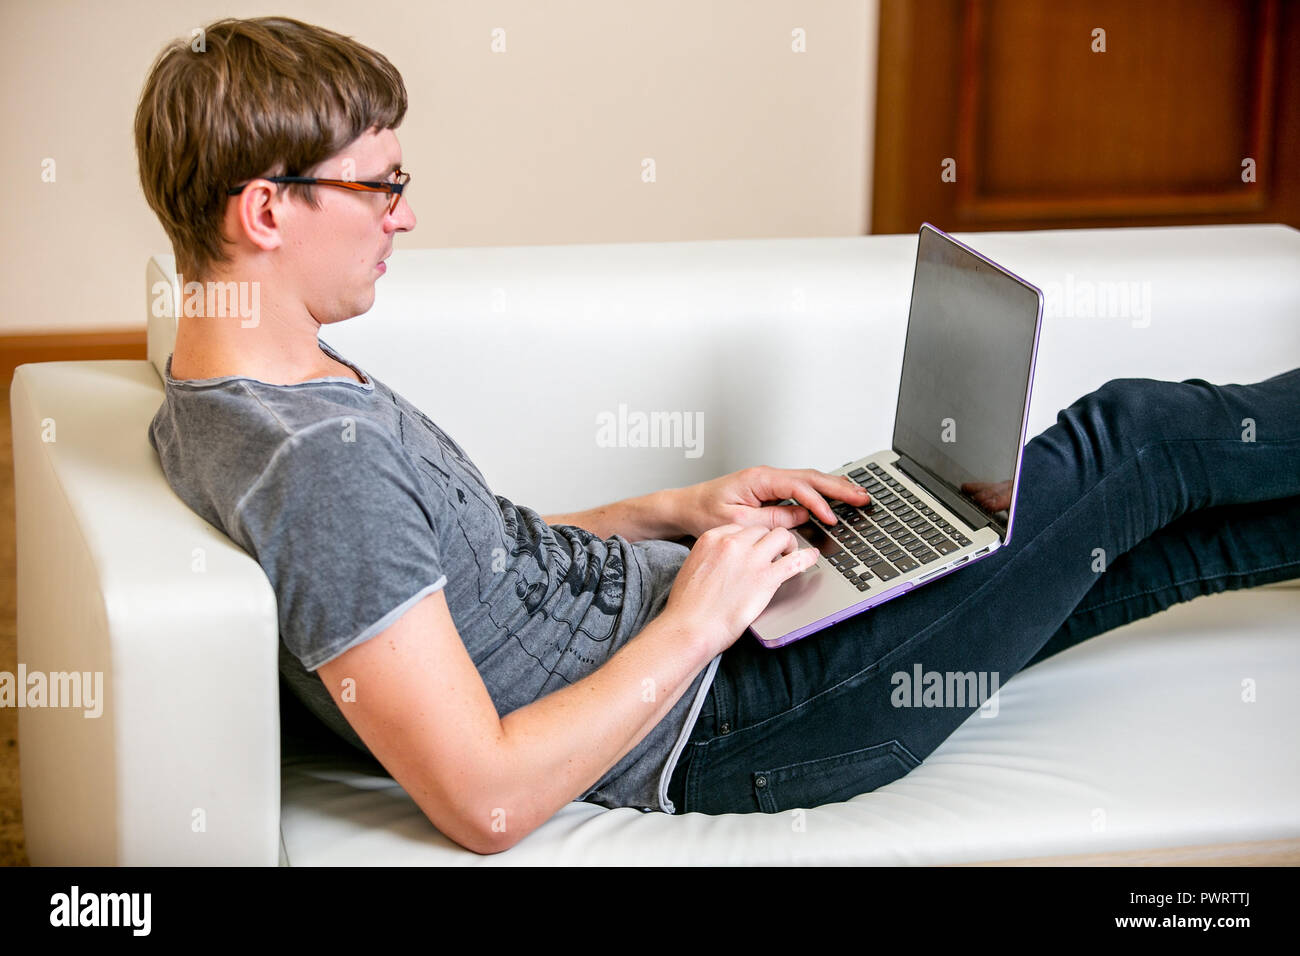 Concentrated young man with glasses working on a laptop in a home office. Prints on the keyboard and scrolls text on the screen while lying on the sofa Stock Photo